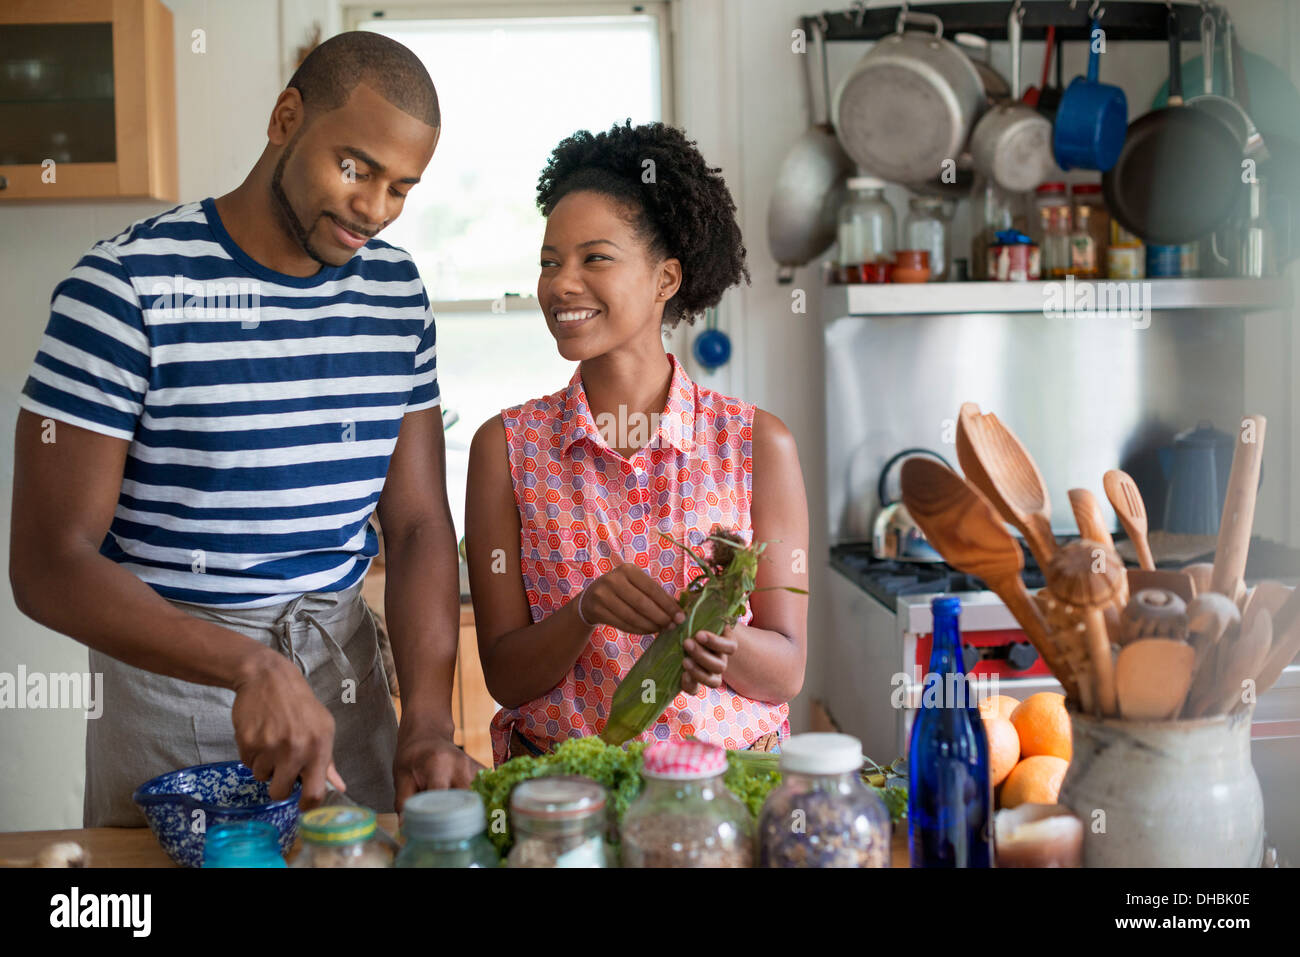 Lifestyle. Two people working in a farmhouse kitchen. Stock Photo